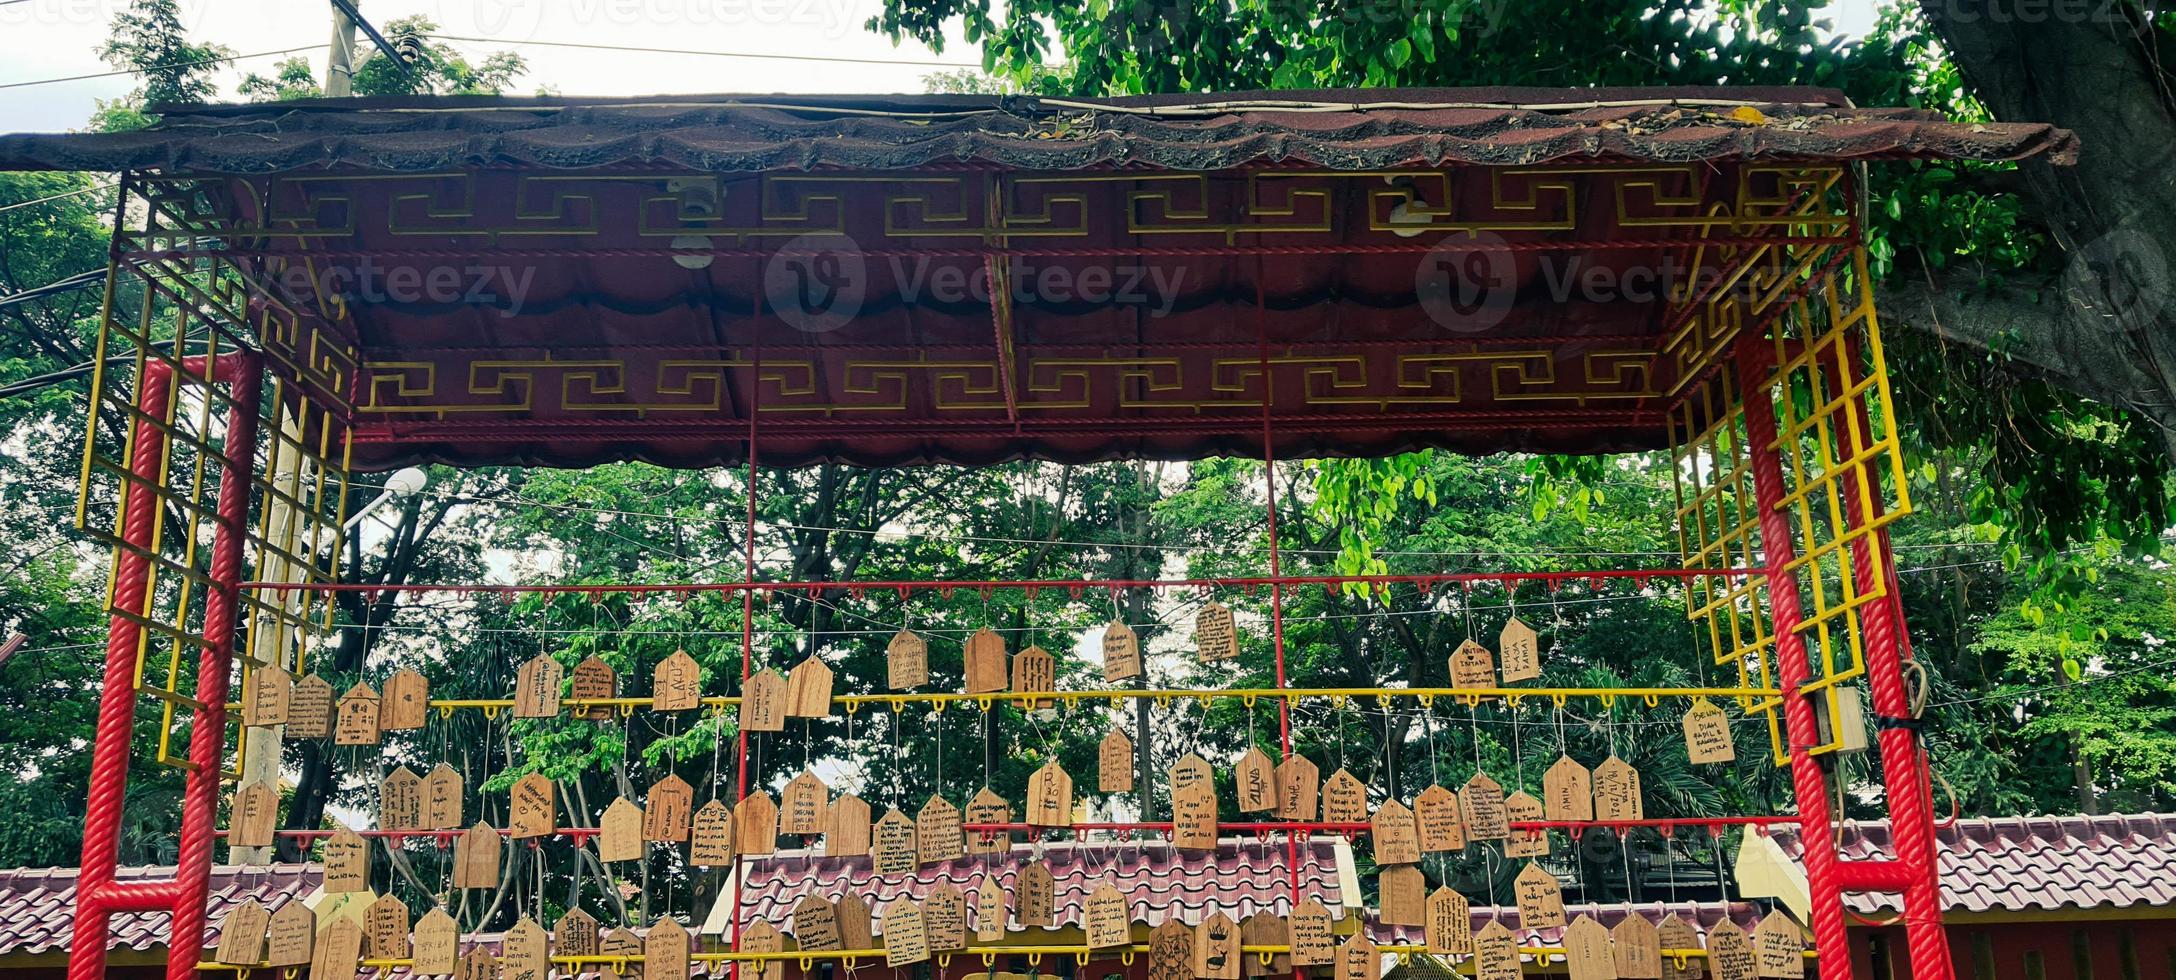 Prayers written on wood and hung in the Sam Poo Kong Temple area of Semarang. photo